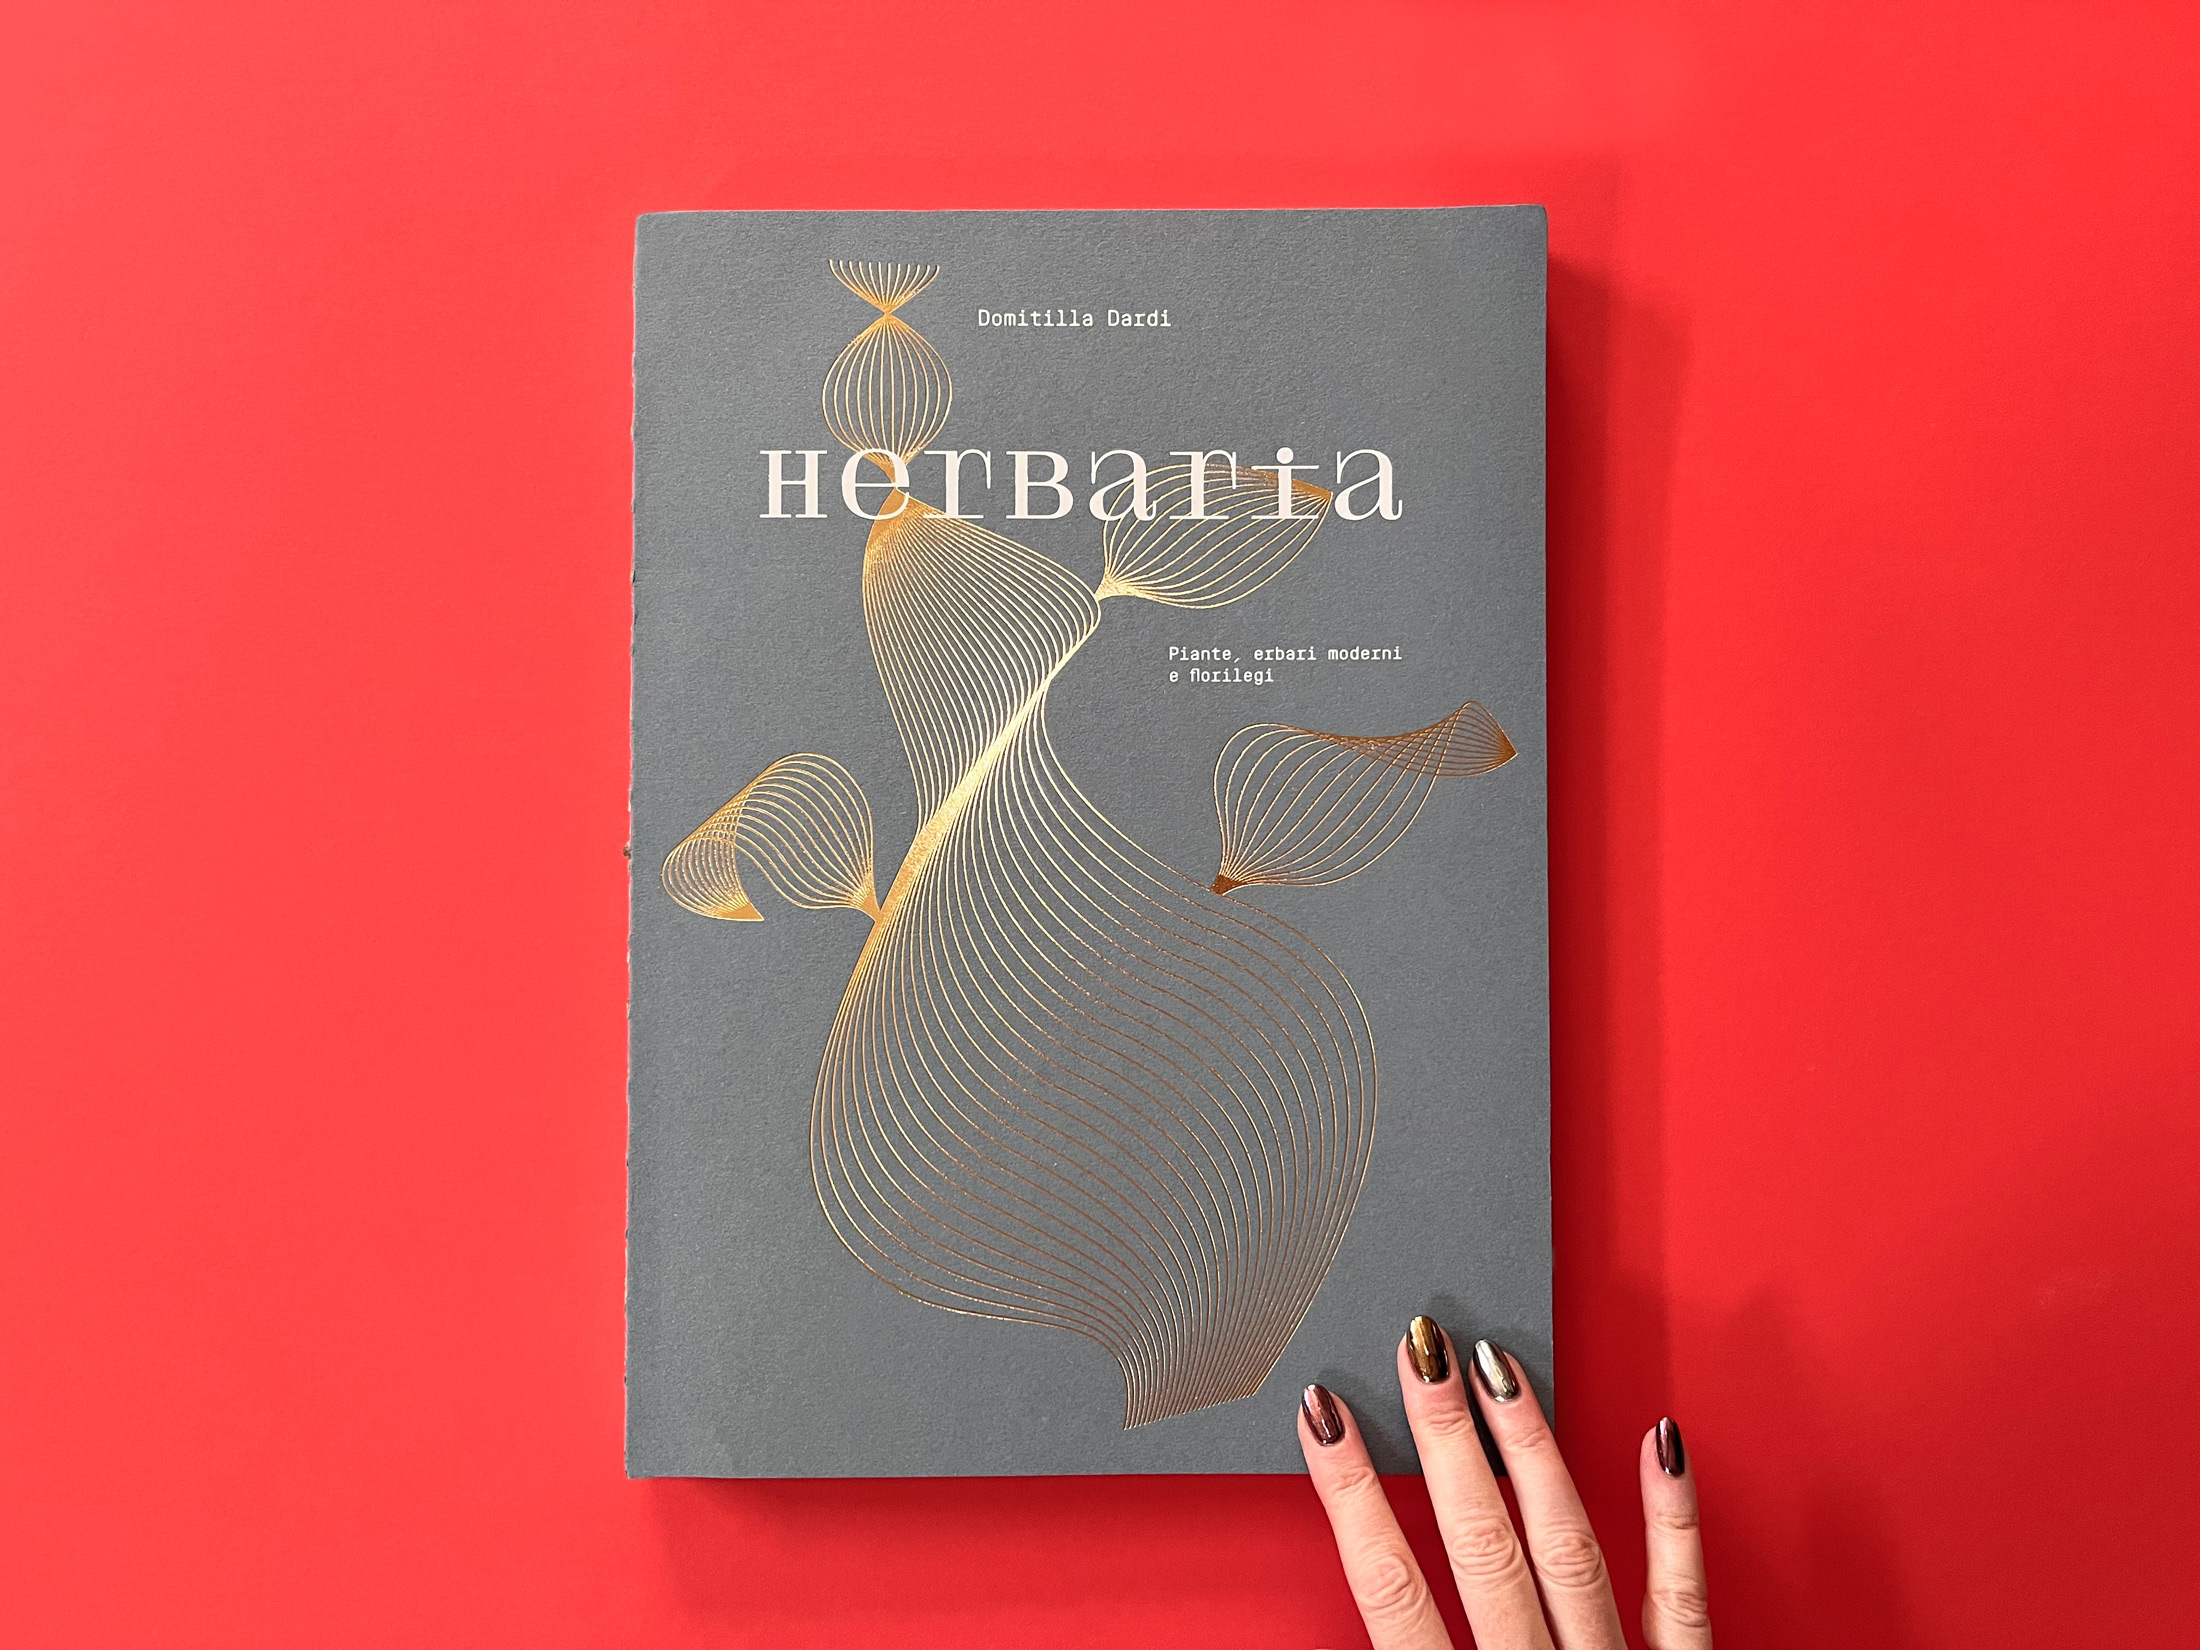 hand with metallic nail polish holding gold foil embossed herbaria magazine on red backdrop